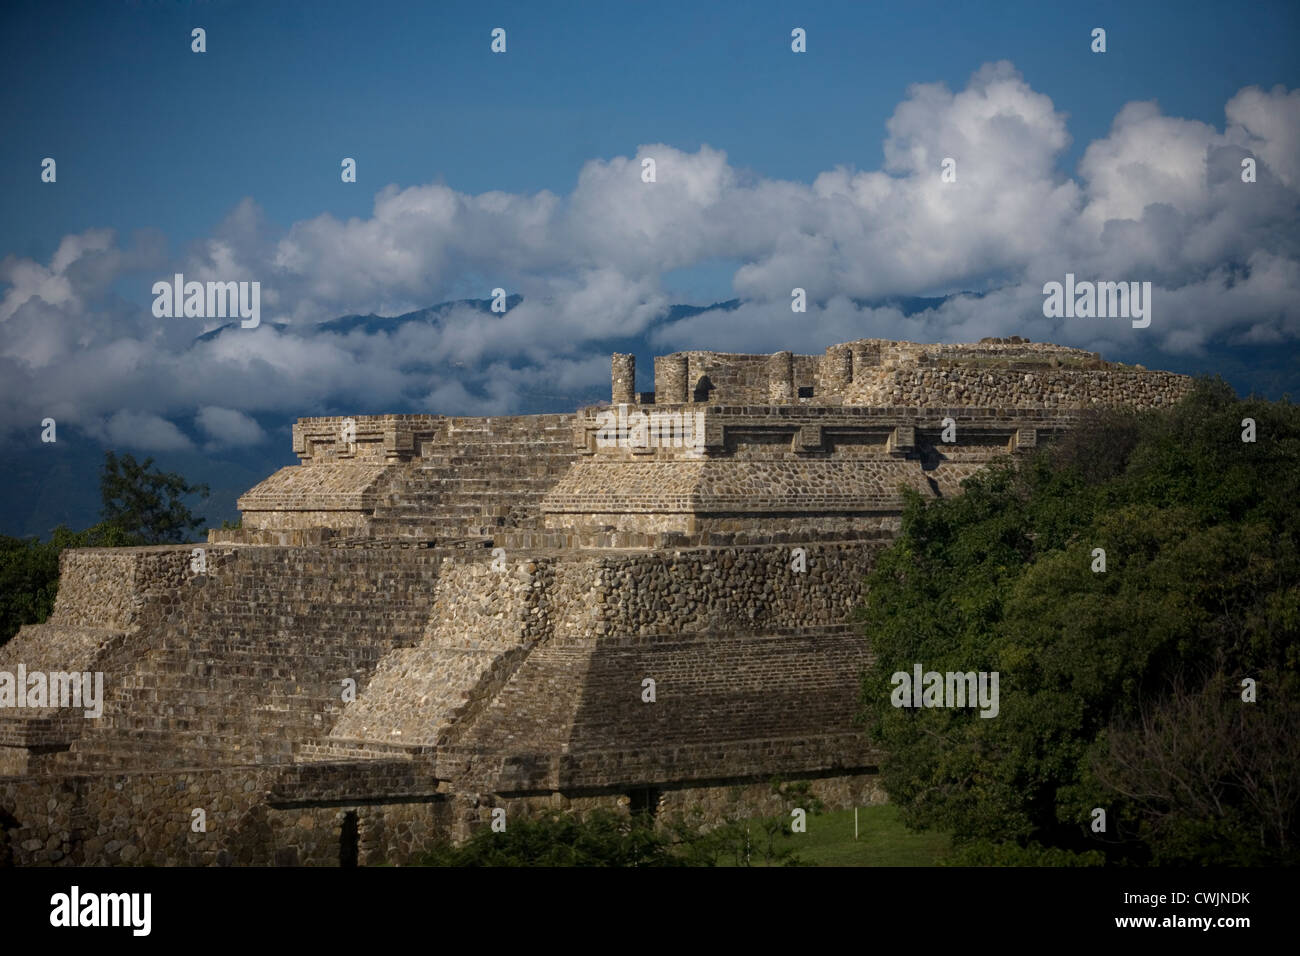 West Side platform of the Zapotec city of Monte Alban, Oaxaca, Mexico, July 13, 2012. Stock Photo